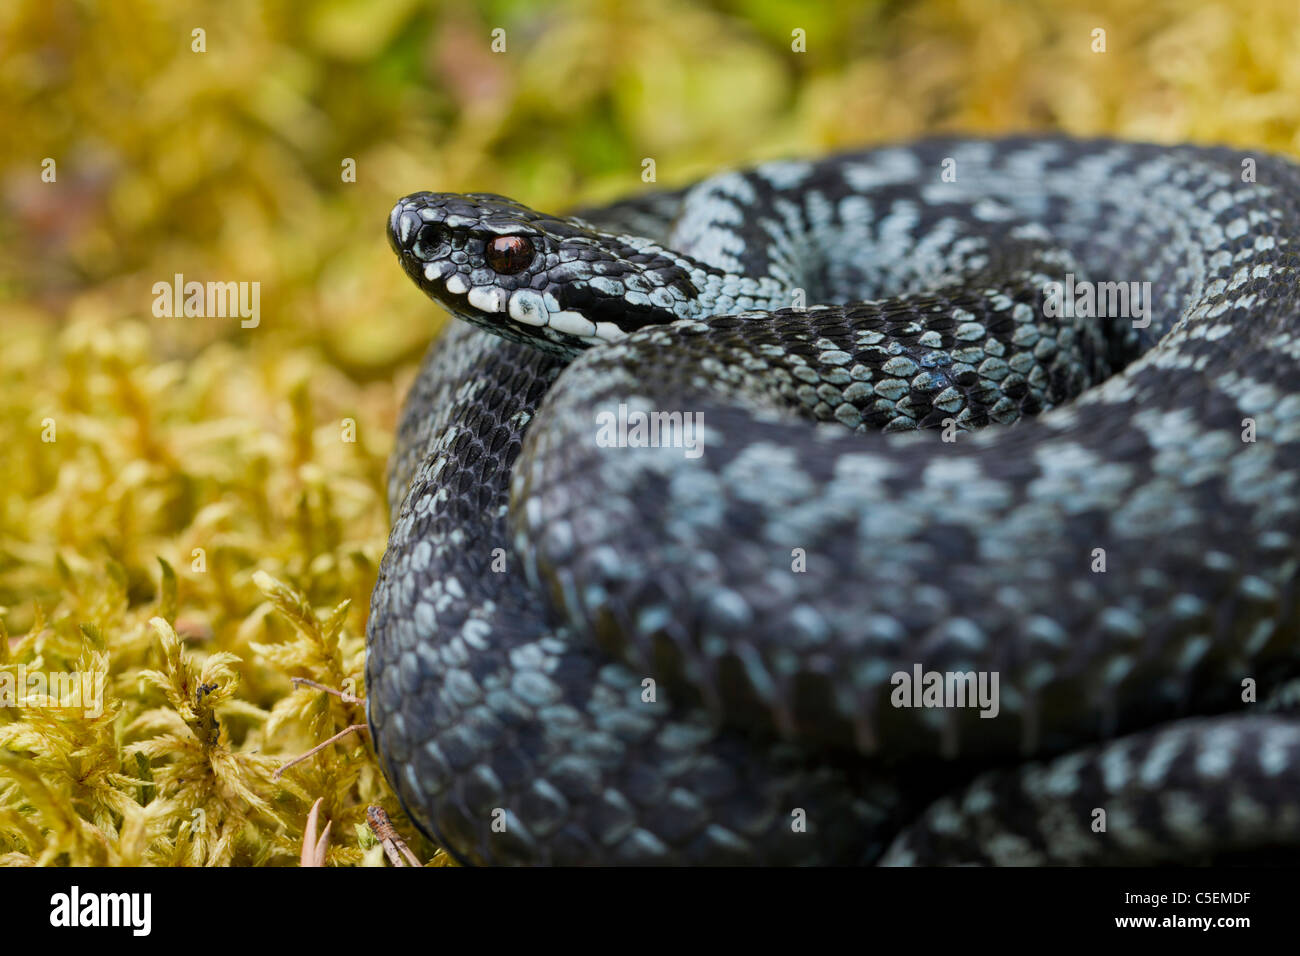 Common European adder / viper (Vipera berus) curled up in striking pose, grey color phase, Sweden Stock Photo